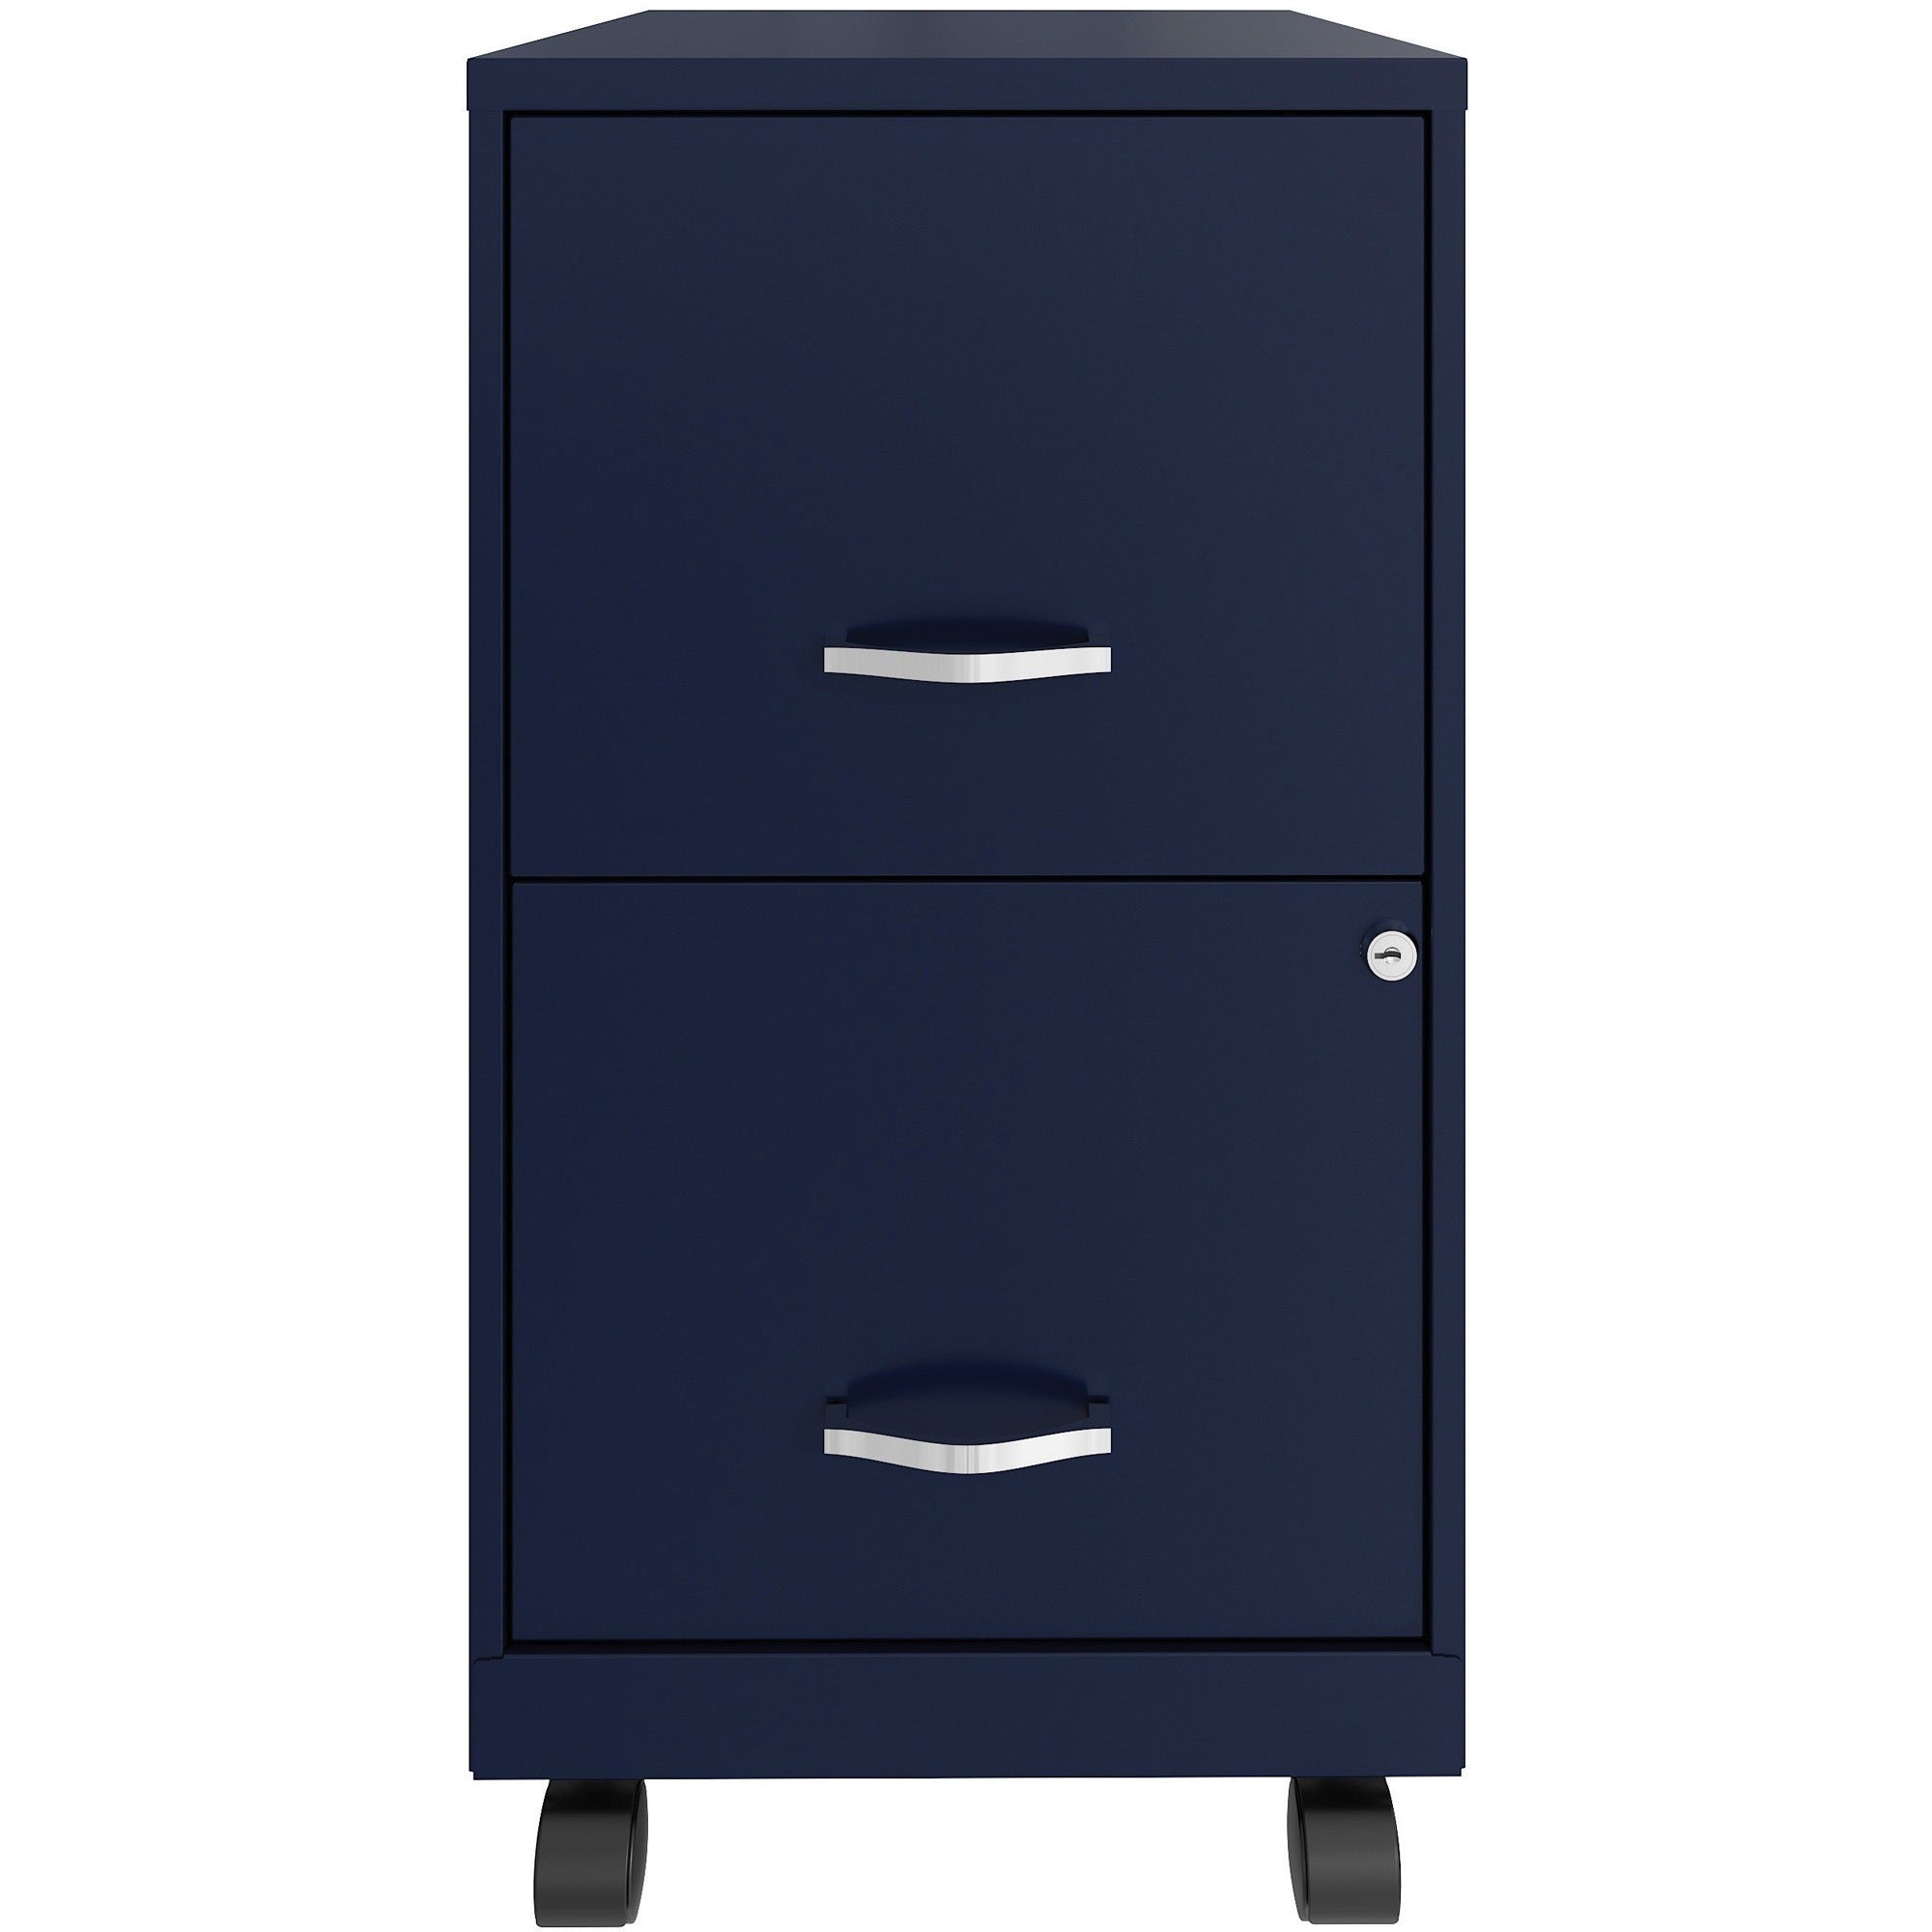 nusparc-mobile-file-cabinet-142-x-18-x-265-for-file-letter-mobility-locking-drawer-glide-suspension-3-4-drawer-extension-cam-lock-nonporous-surface-blue-painted-steel-steel-recycled-assembly-required_nprvf218amny - 2